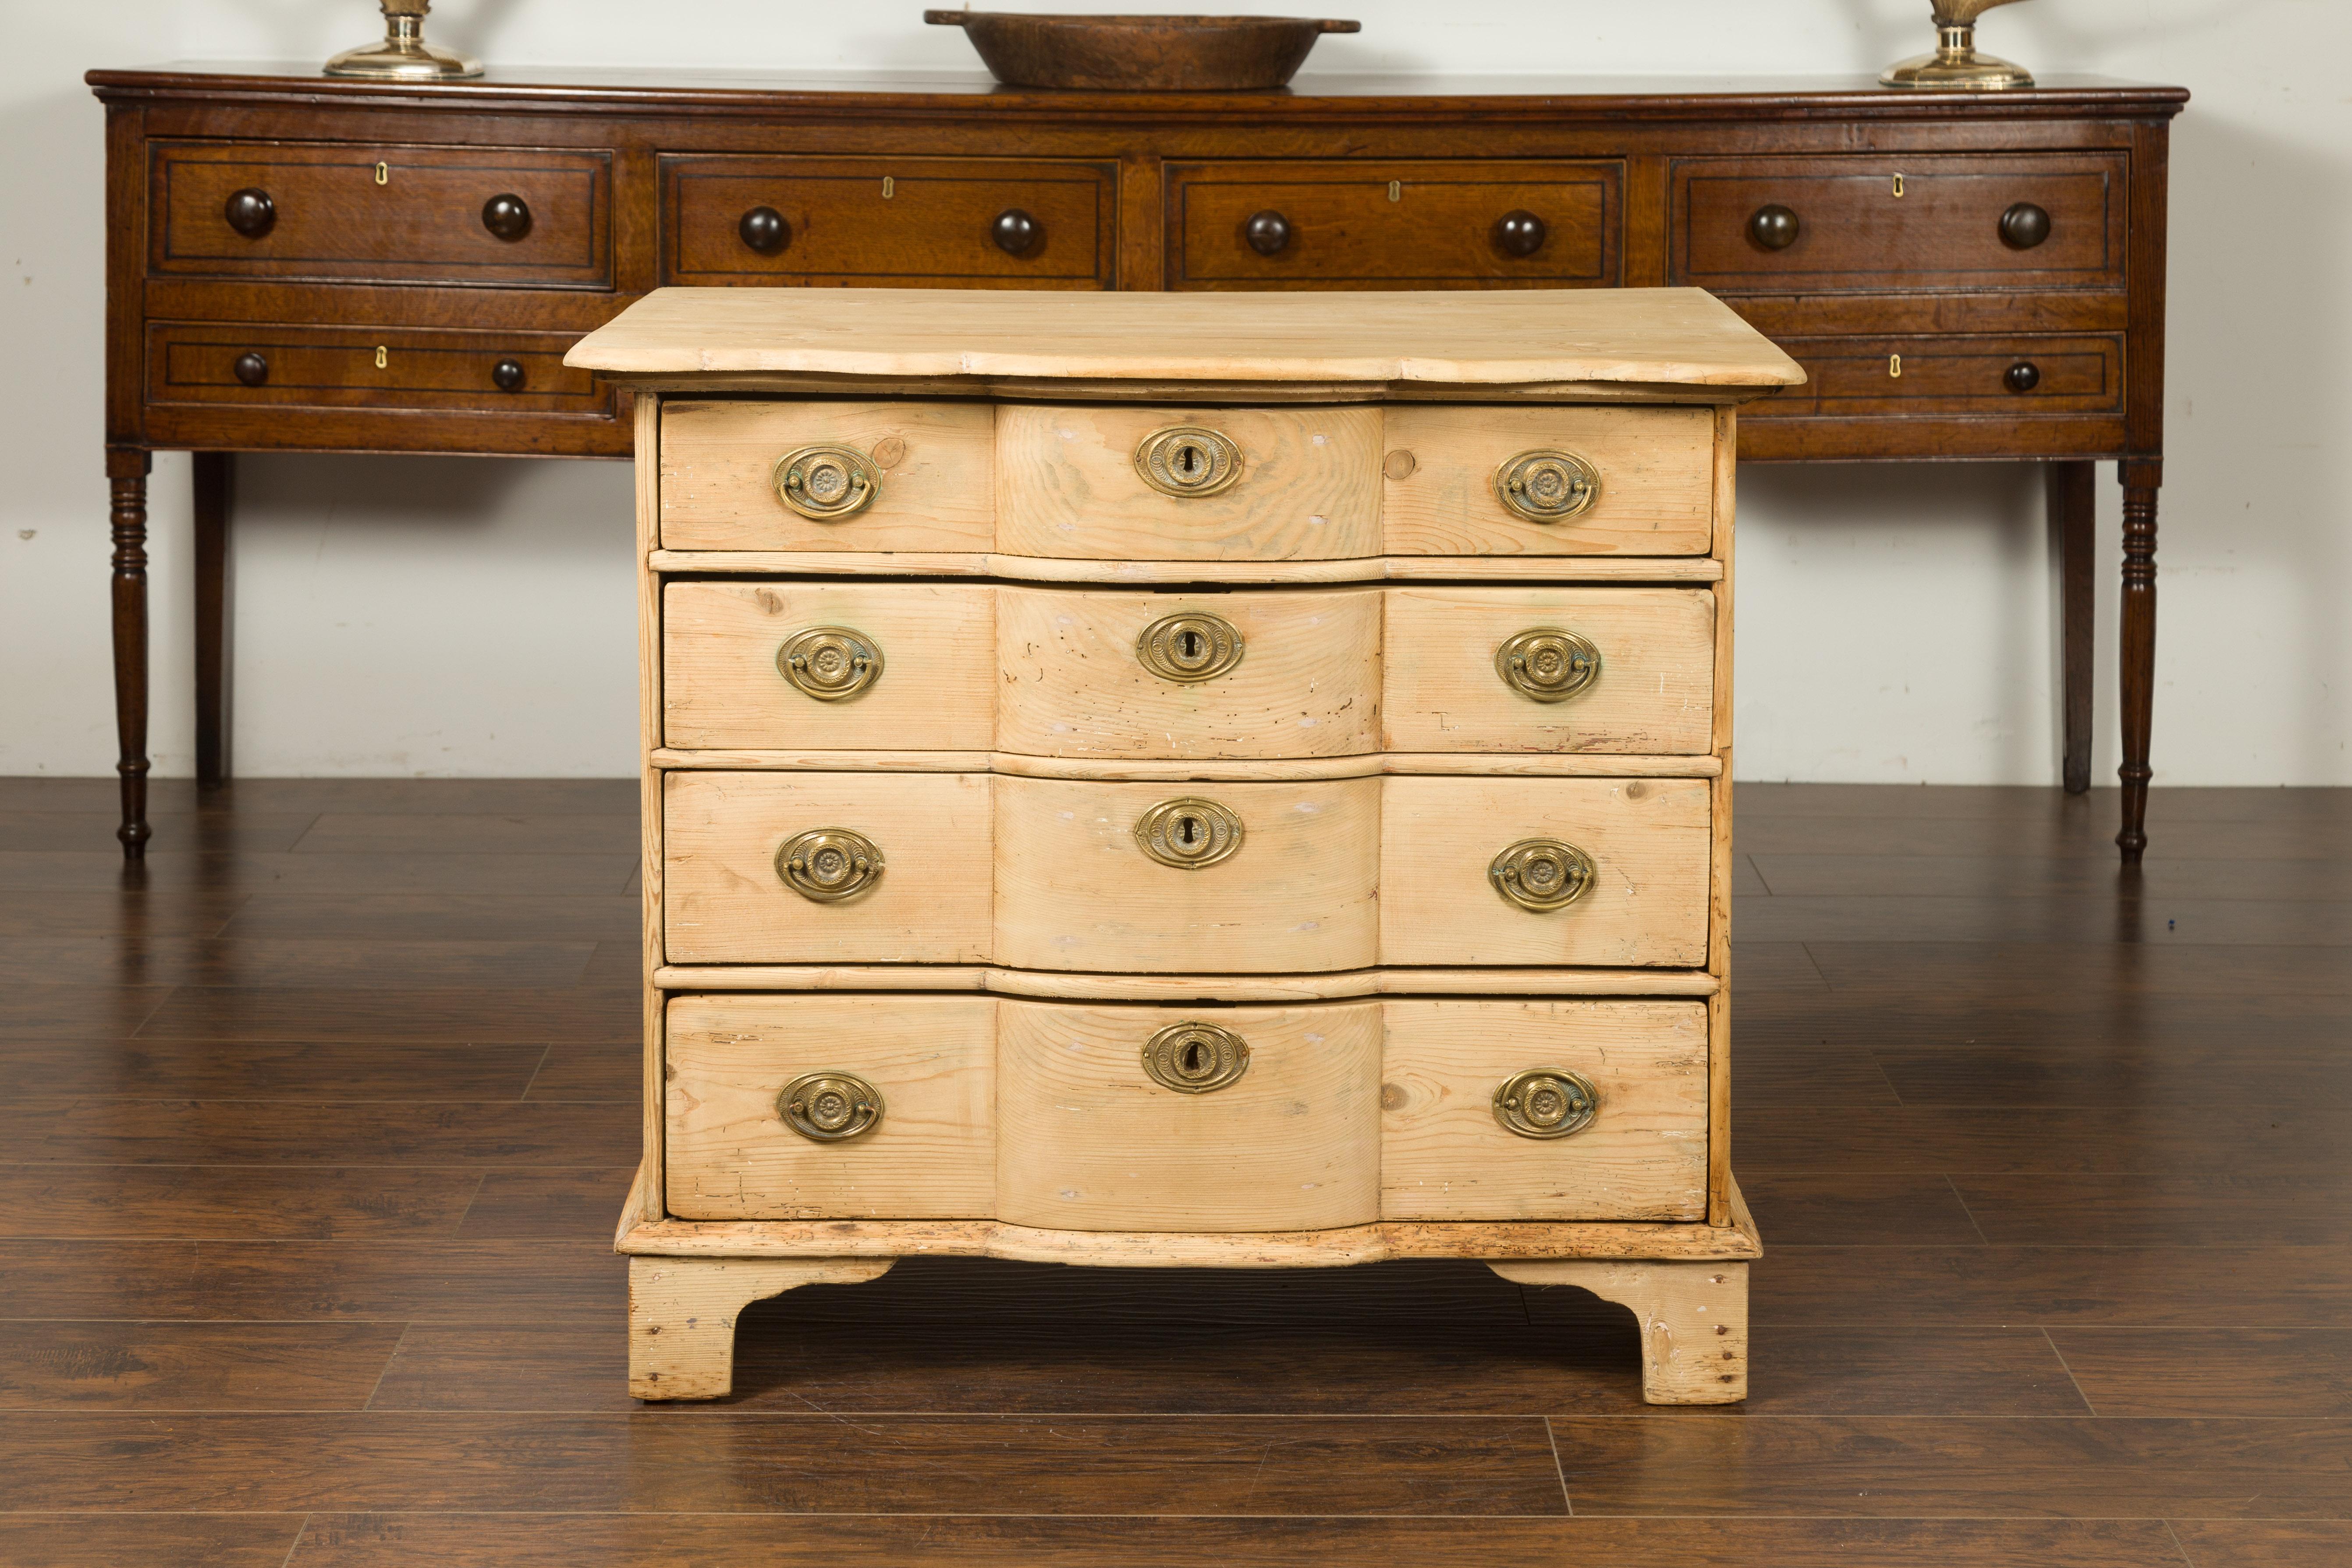 An Italian freshly bleached pine commode from the early 19th century with serpentine front. Born in Italy during the first years of the 19th century, this chest-of-drawers features a rectangular top, curved in the front, nicely following the shape